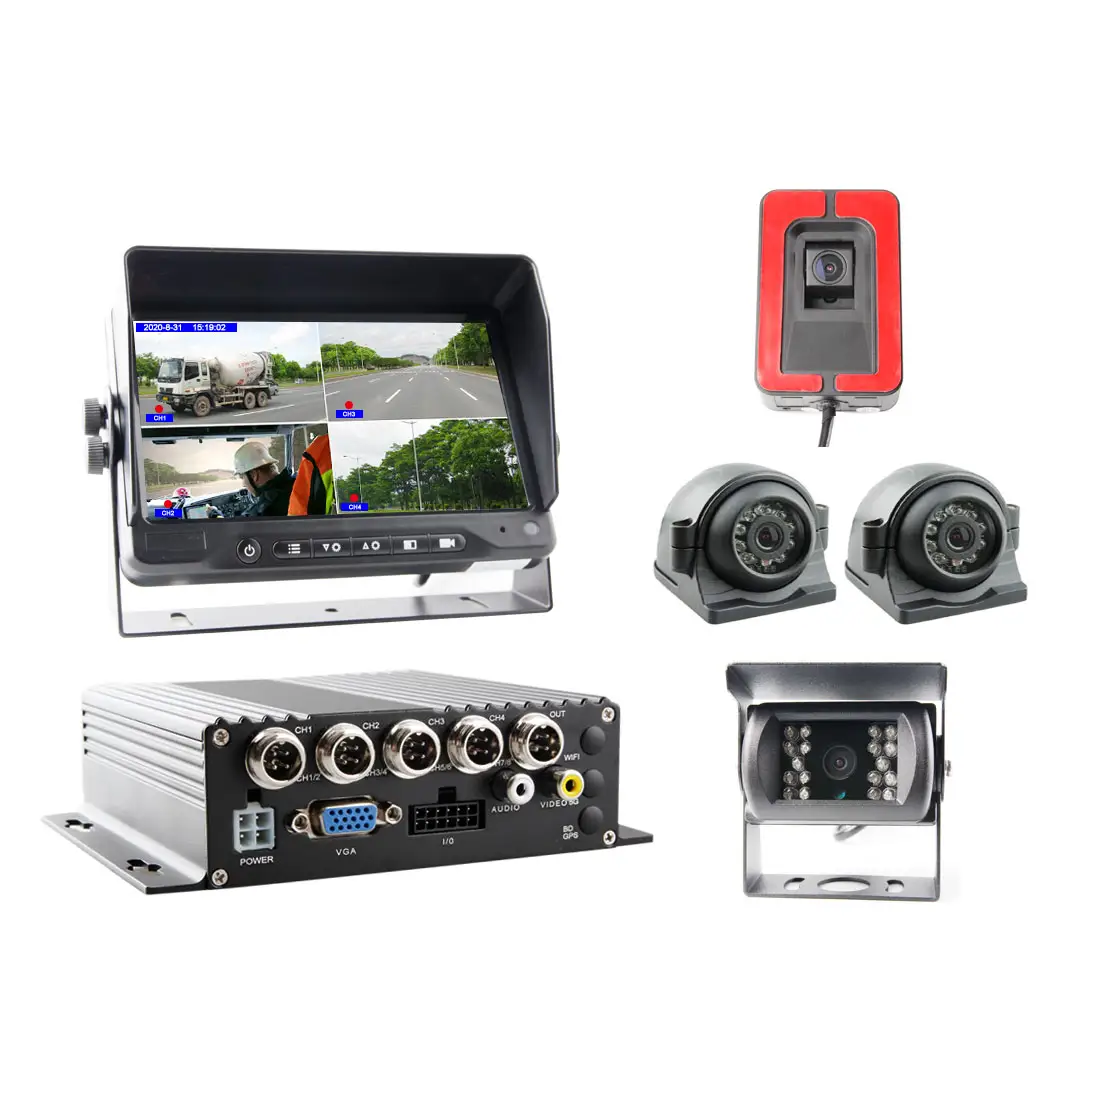 4ch Full Hd 1080P Mobiele Dvr Ondersteuning 3G 4G Wifi Gps Bus Camera Recorder Systeem